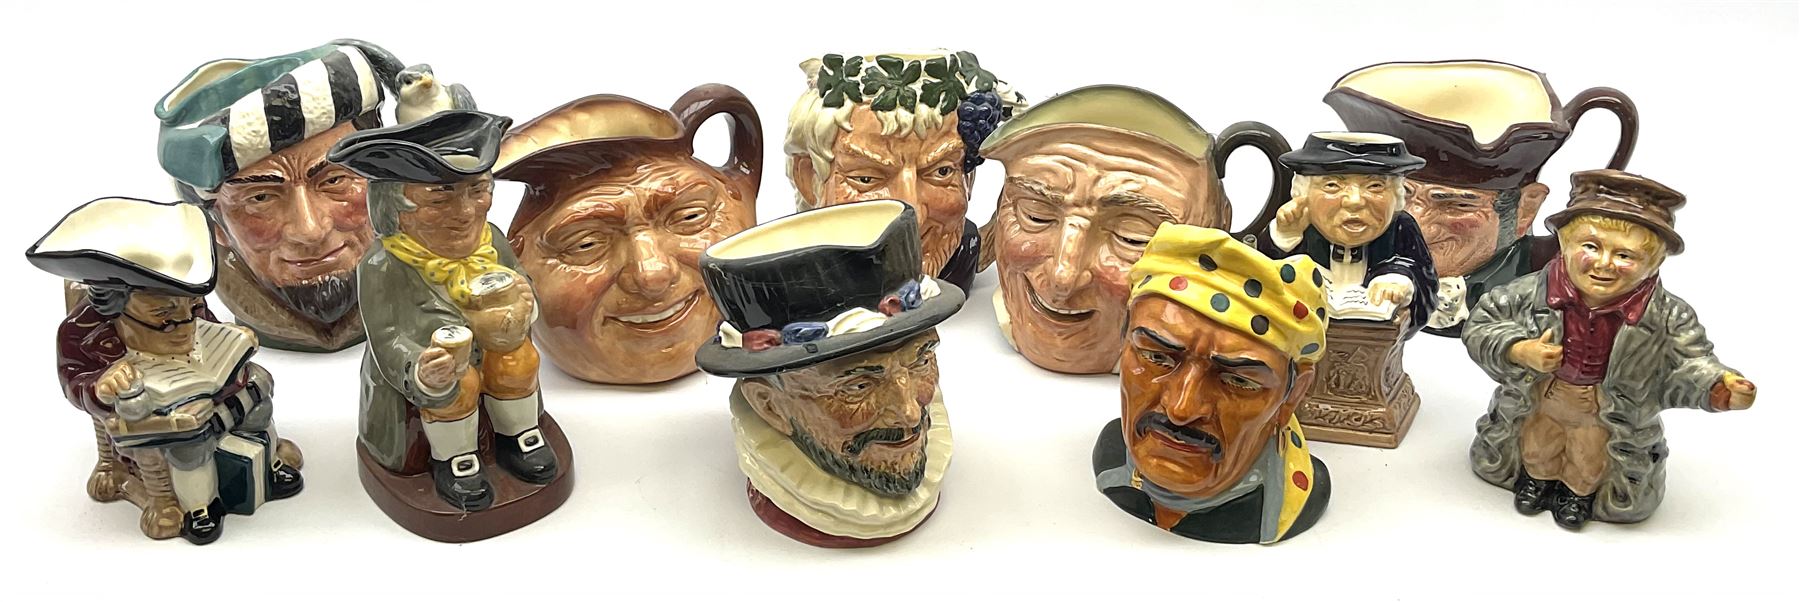 Collection of Royal Doulton character jugs